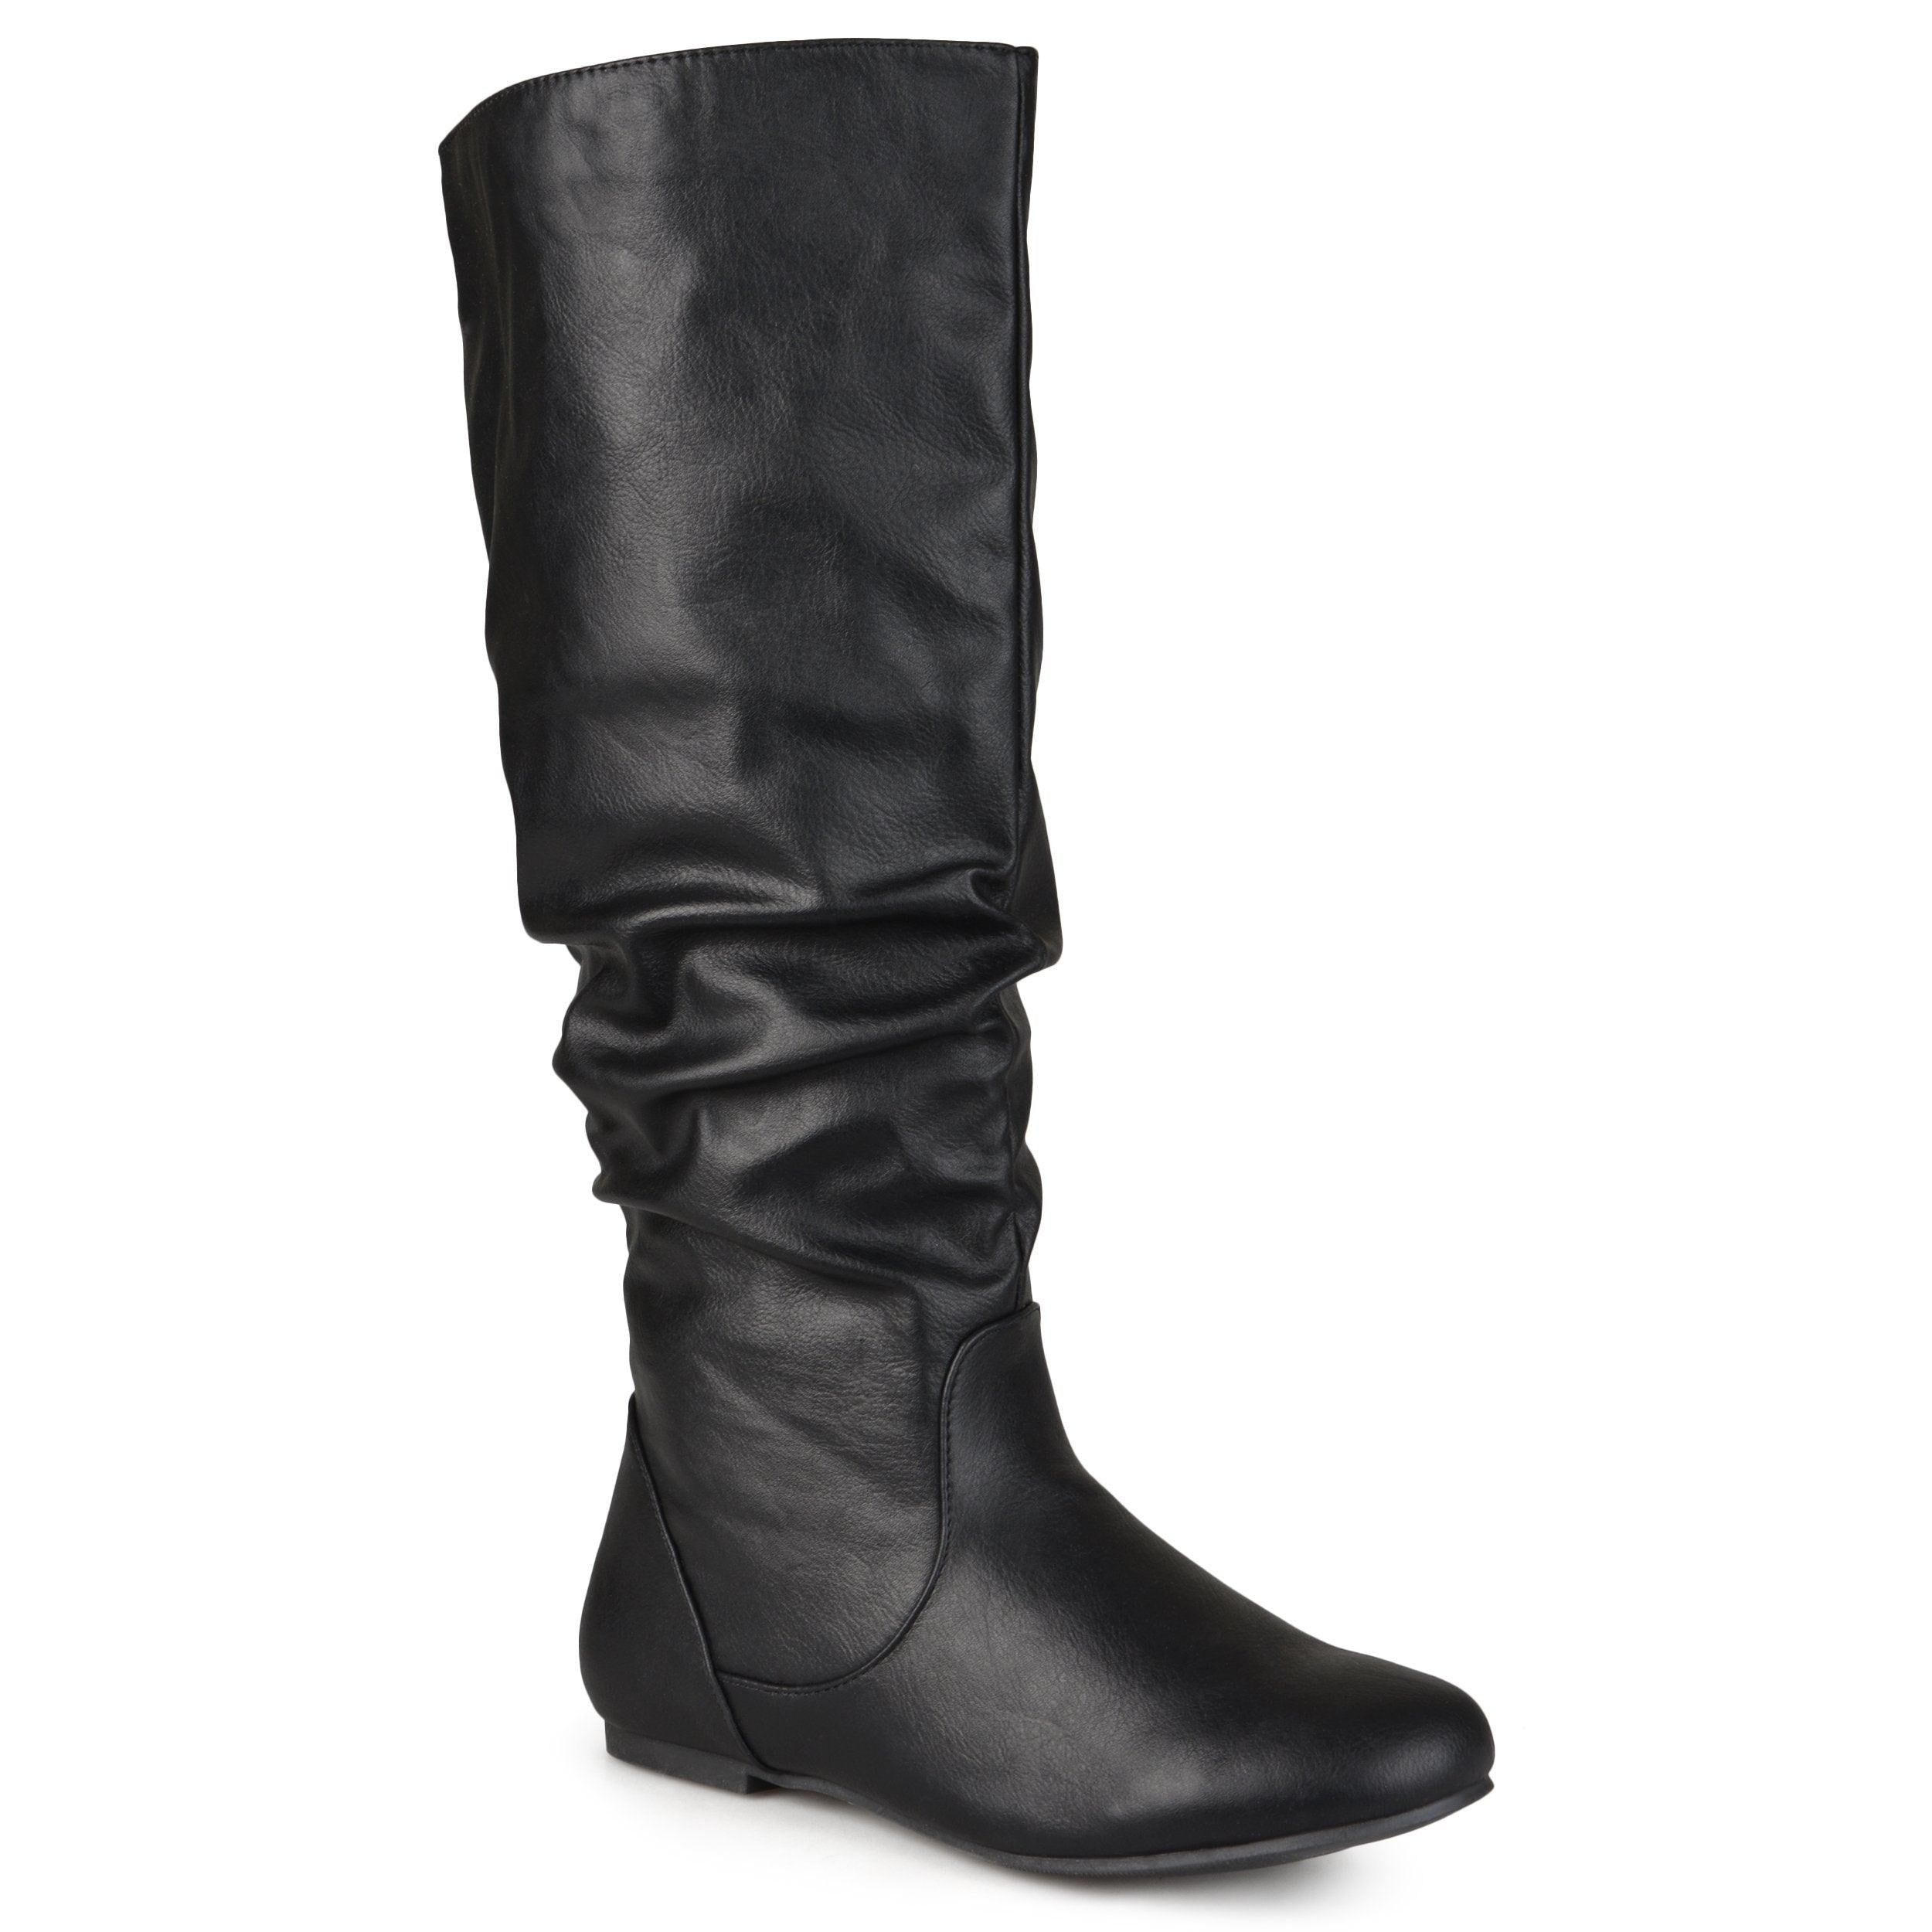 Journee Collection Tiffany Boot - Extra Wide Calf